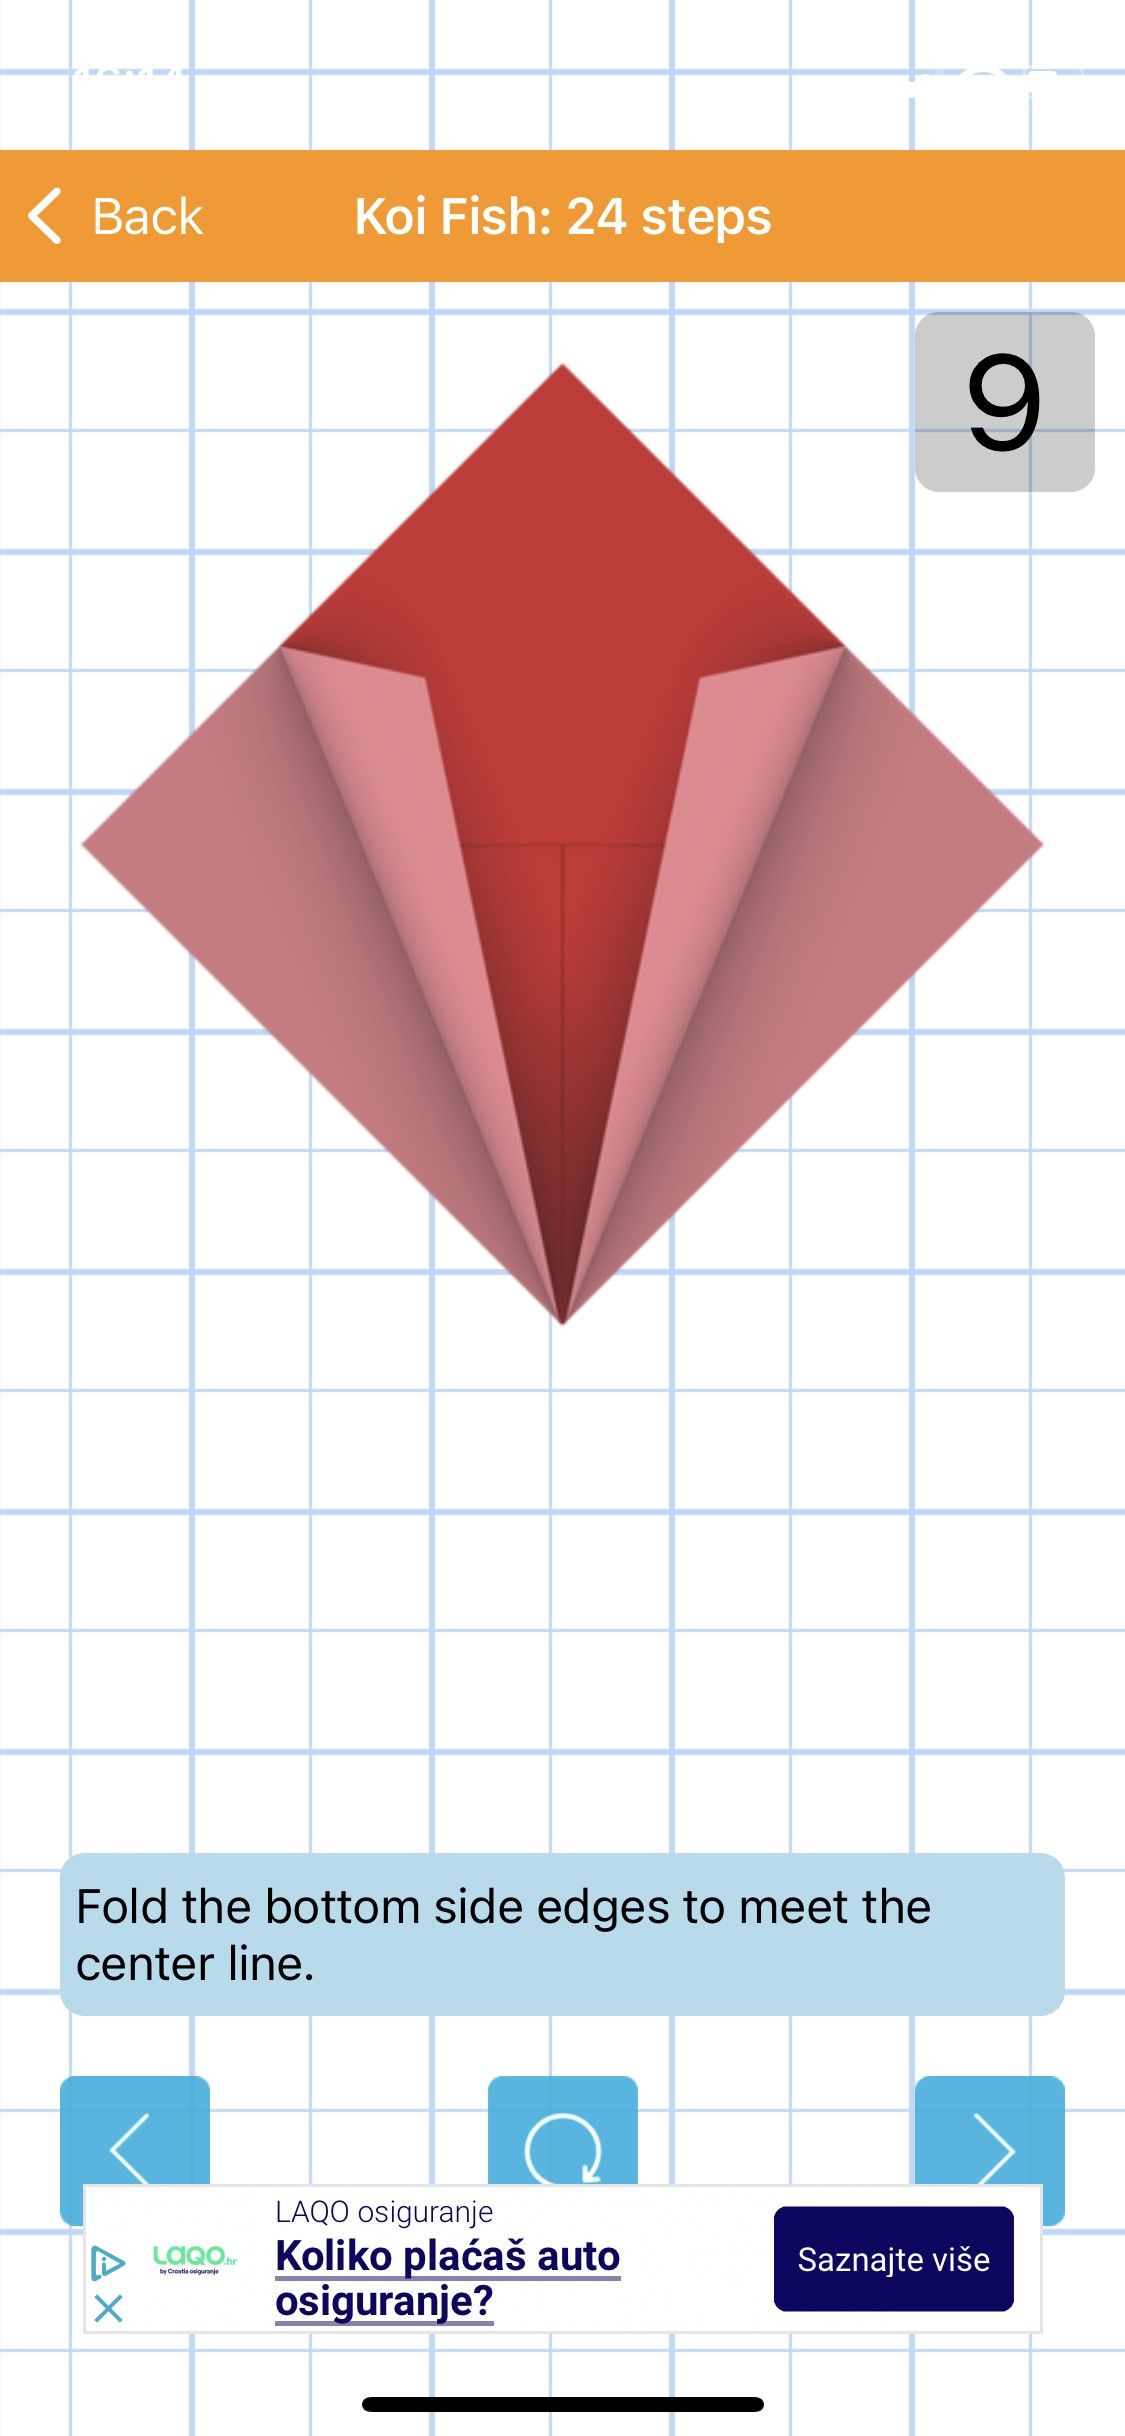 How to Make Origami app - screenshot of instructions